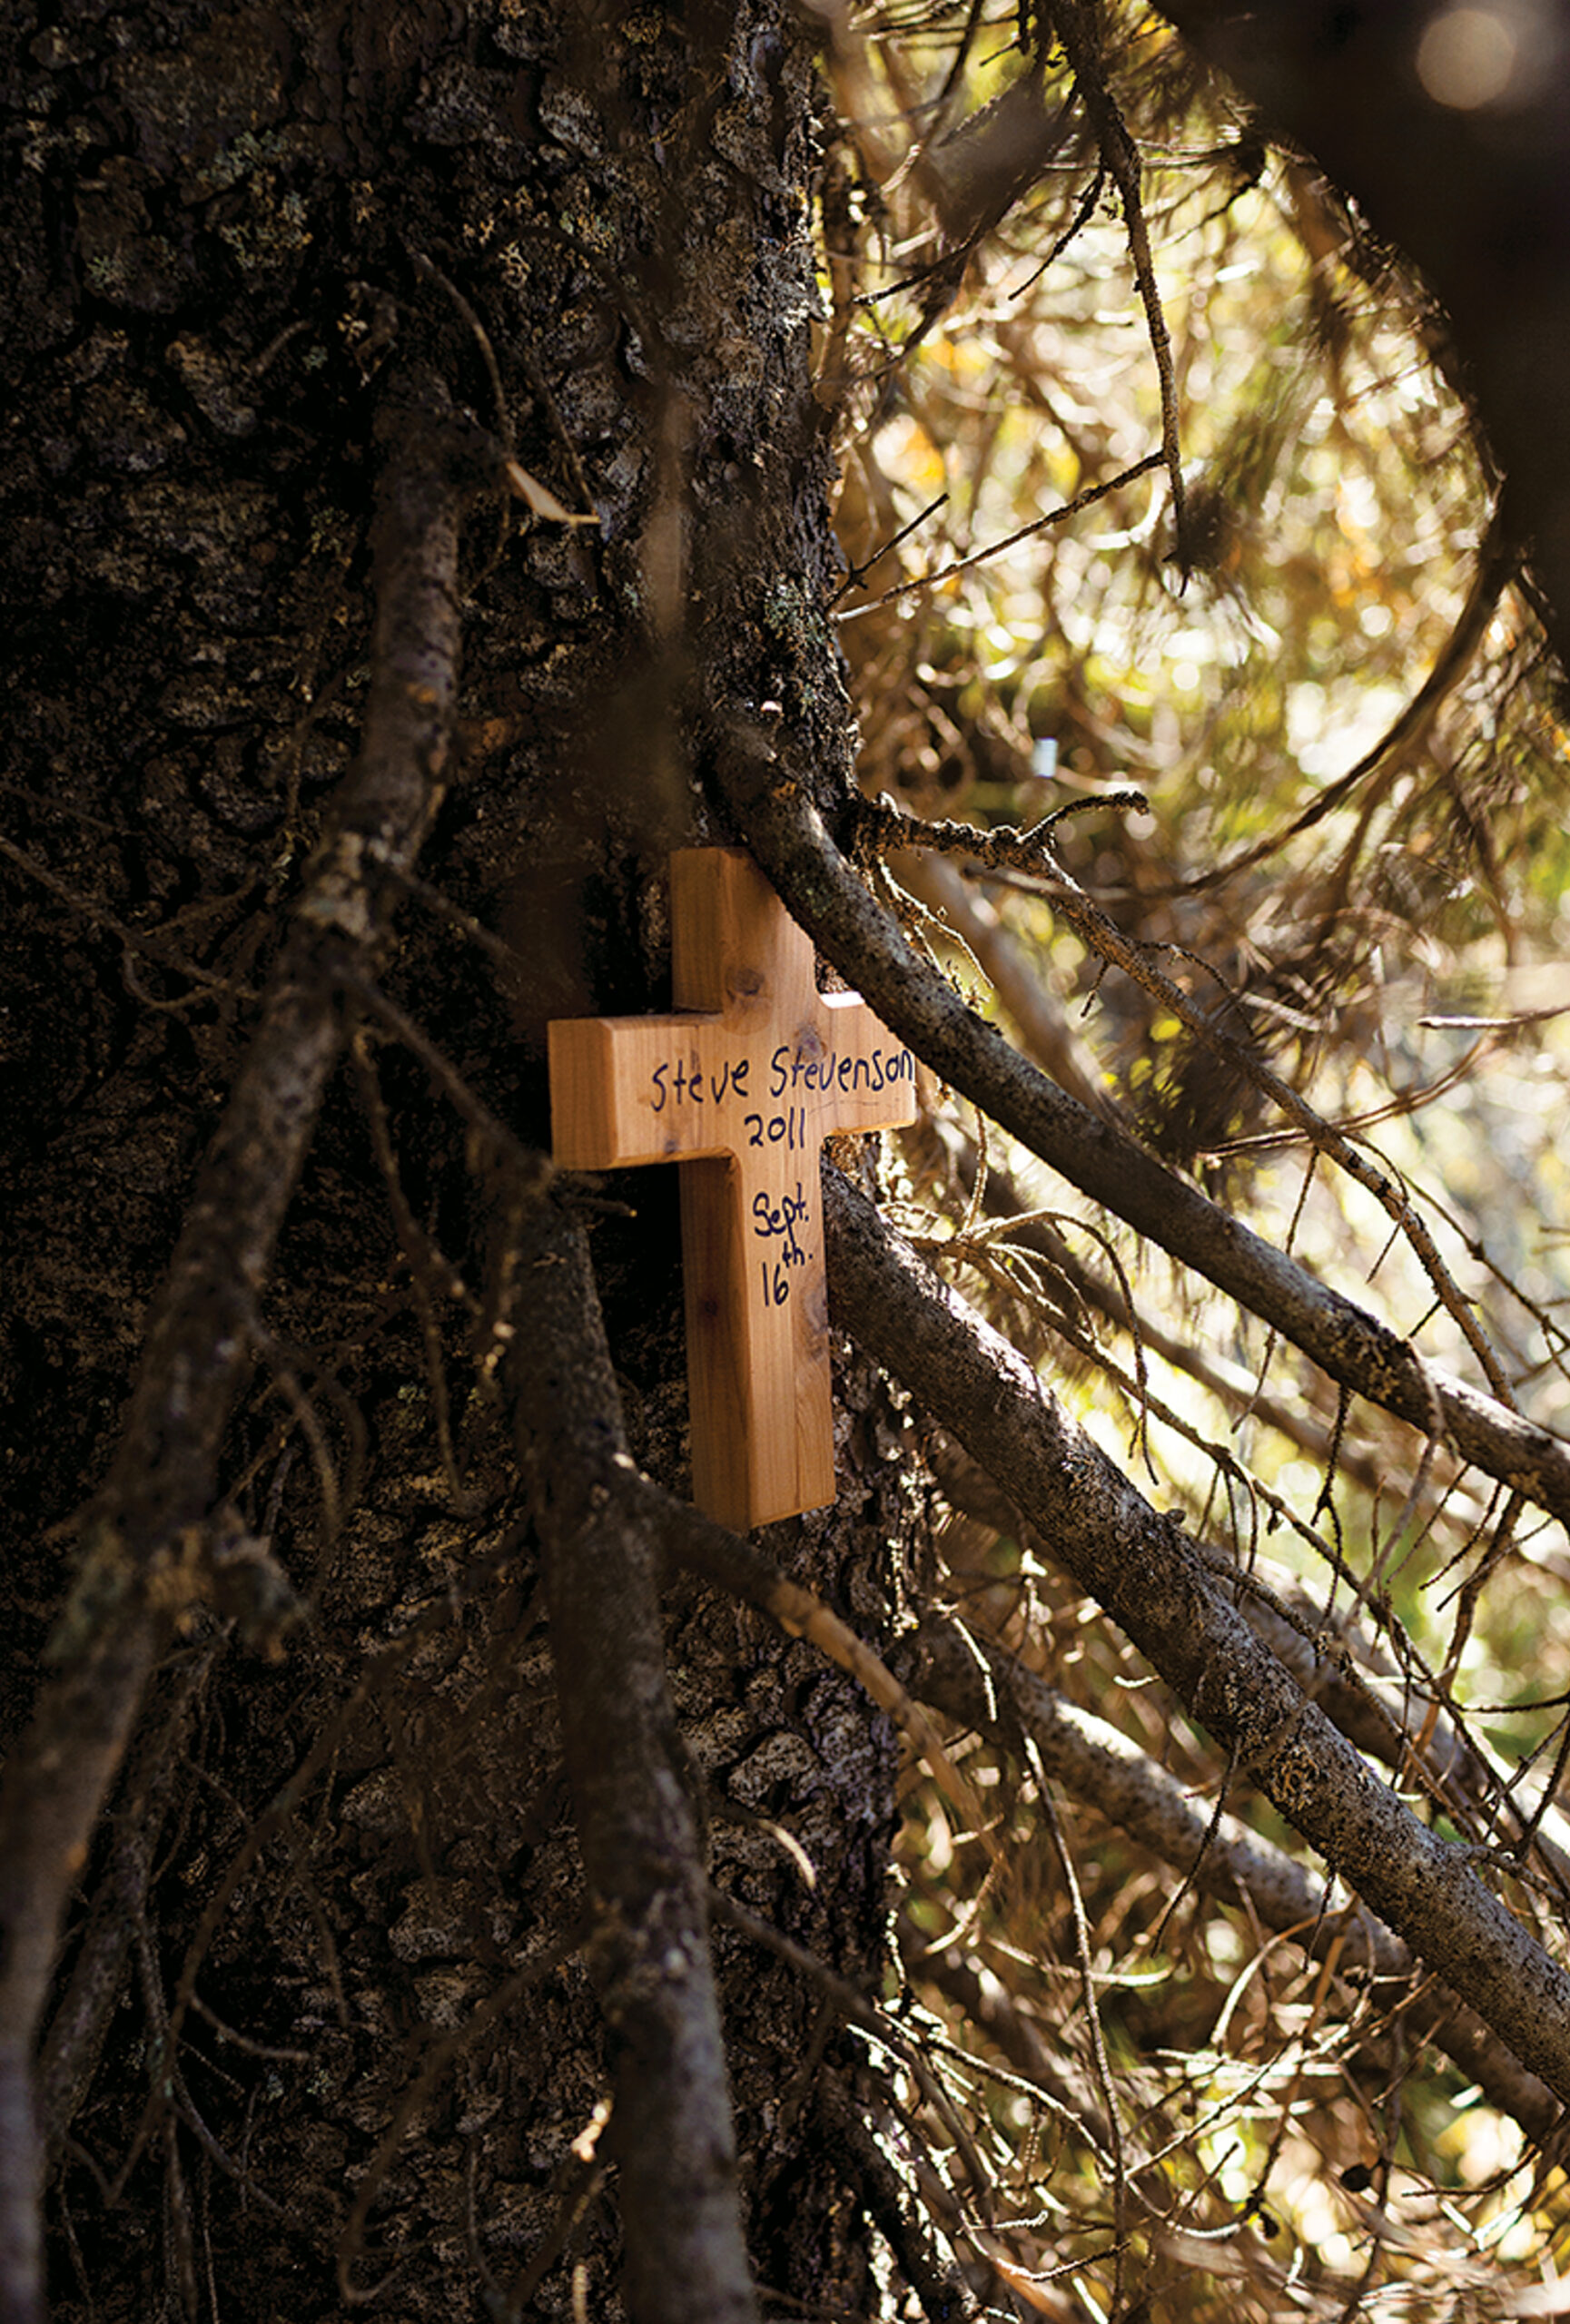 A memorial for a hunter killed during a grizzly attack in Idaho in 2011.